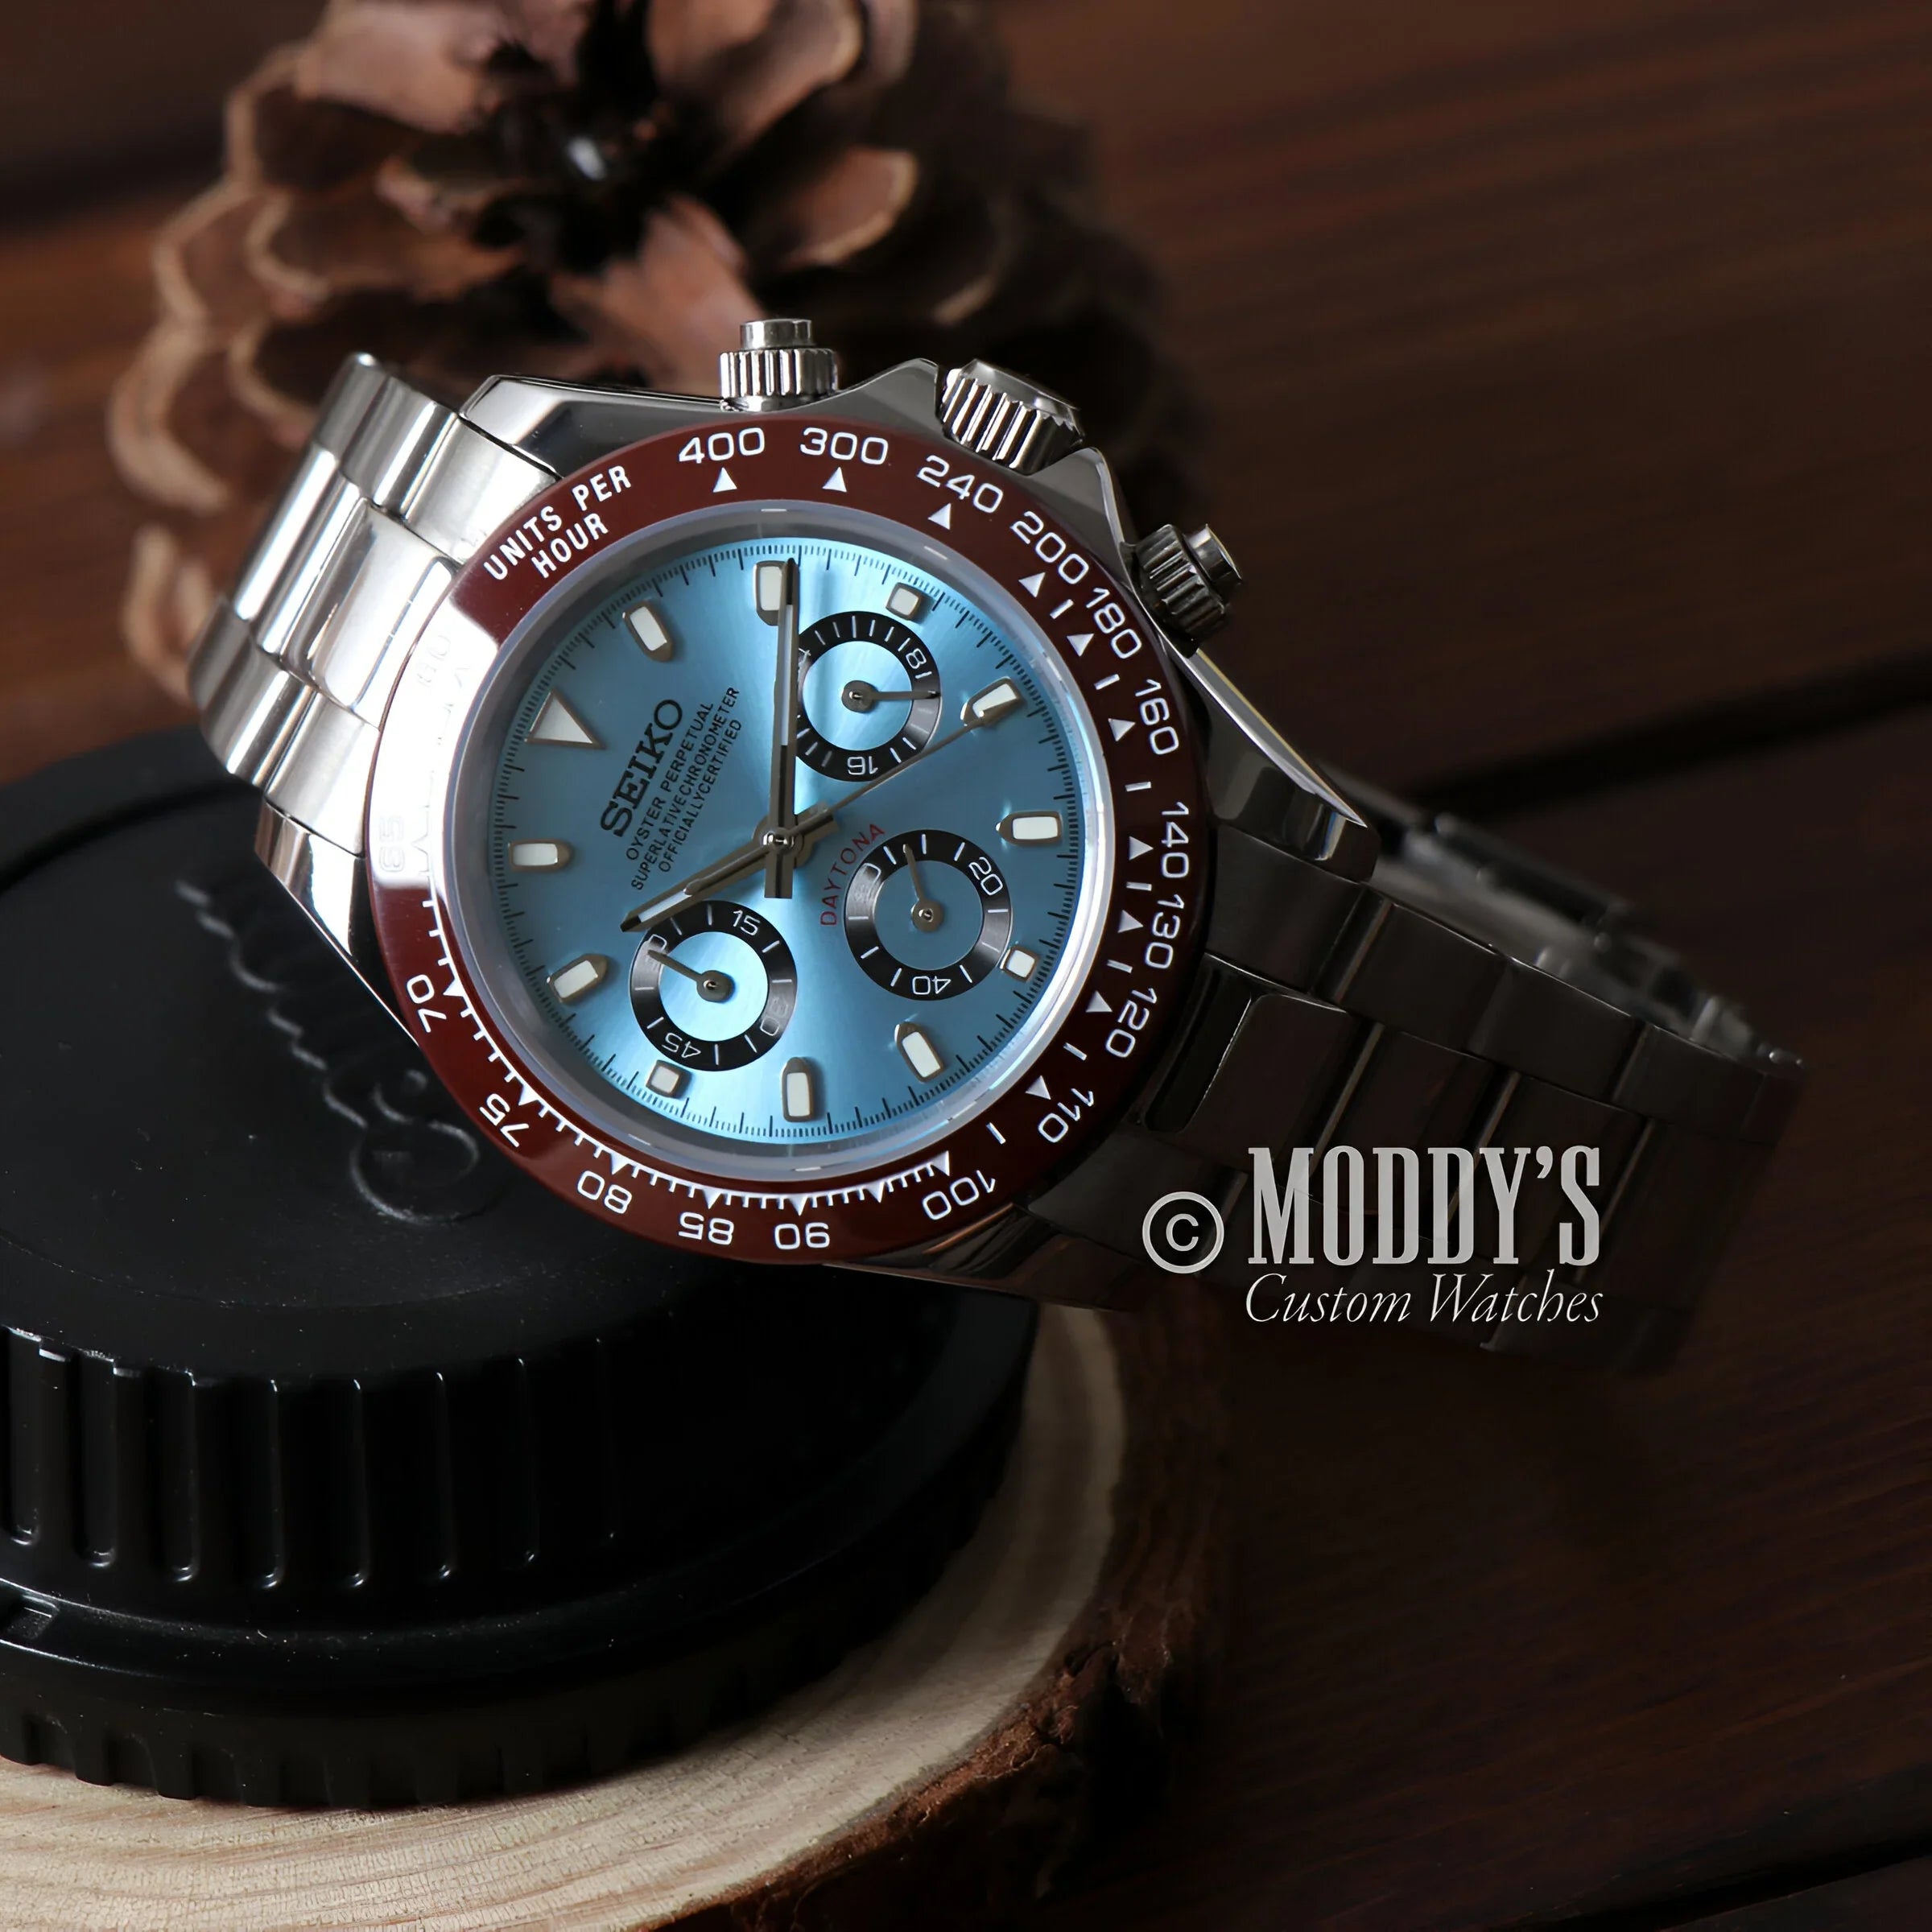 Seitona Platinum Watch With Blue Dial, Vk63 Hybrid Movement, On a Wooden Table